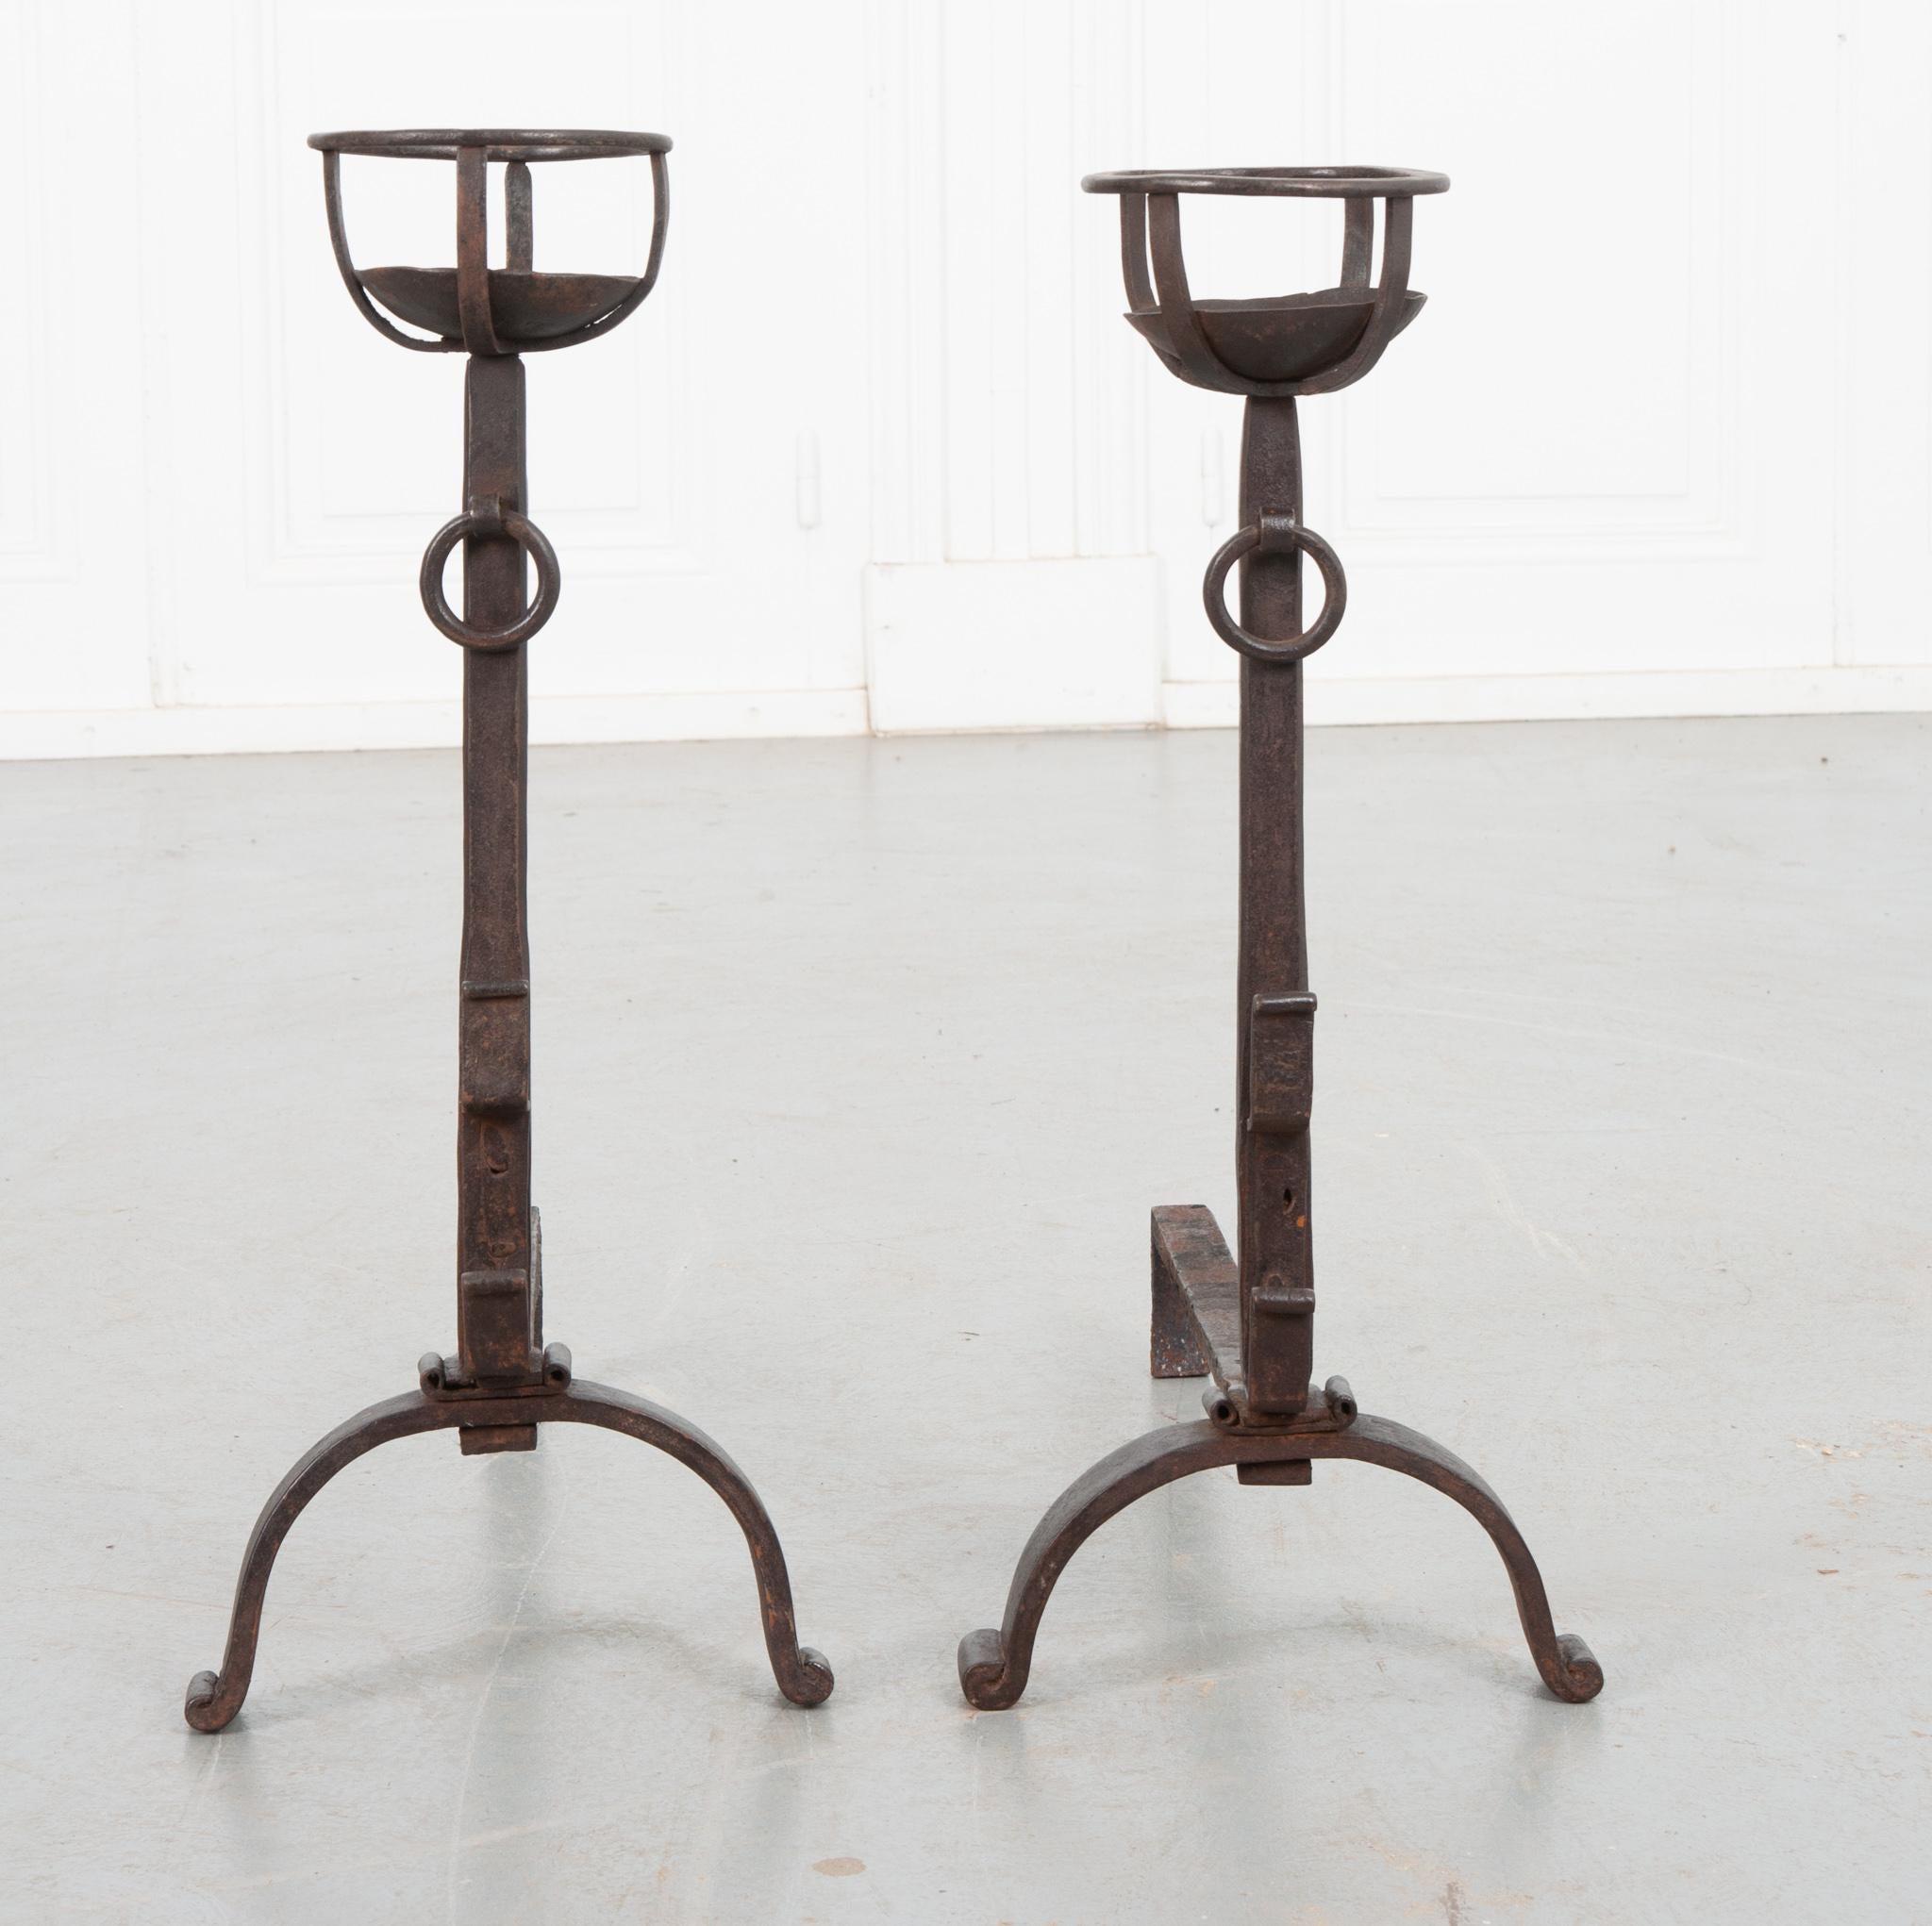 Rustic French 19th Century Forged Iron Andirons For Sale